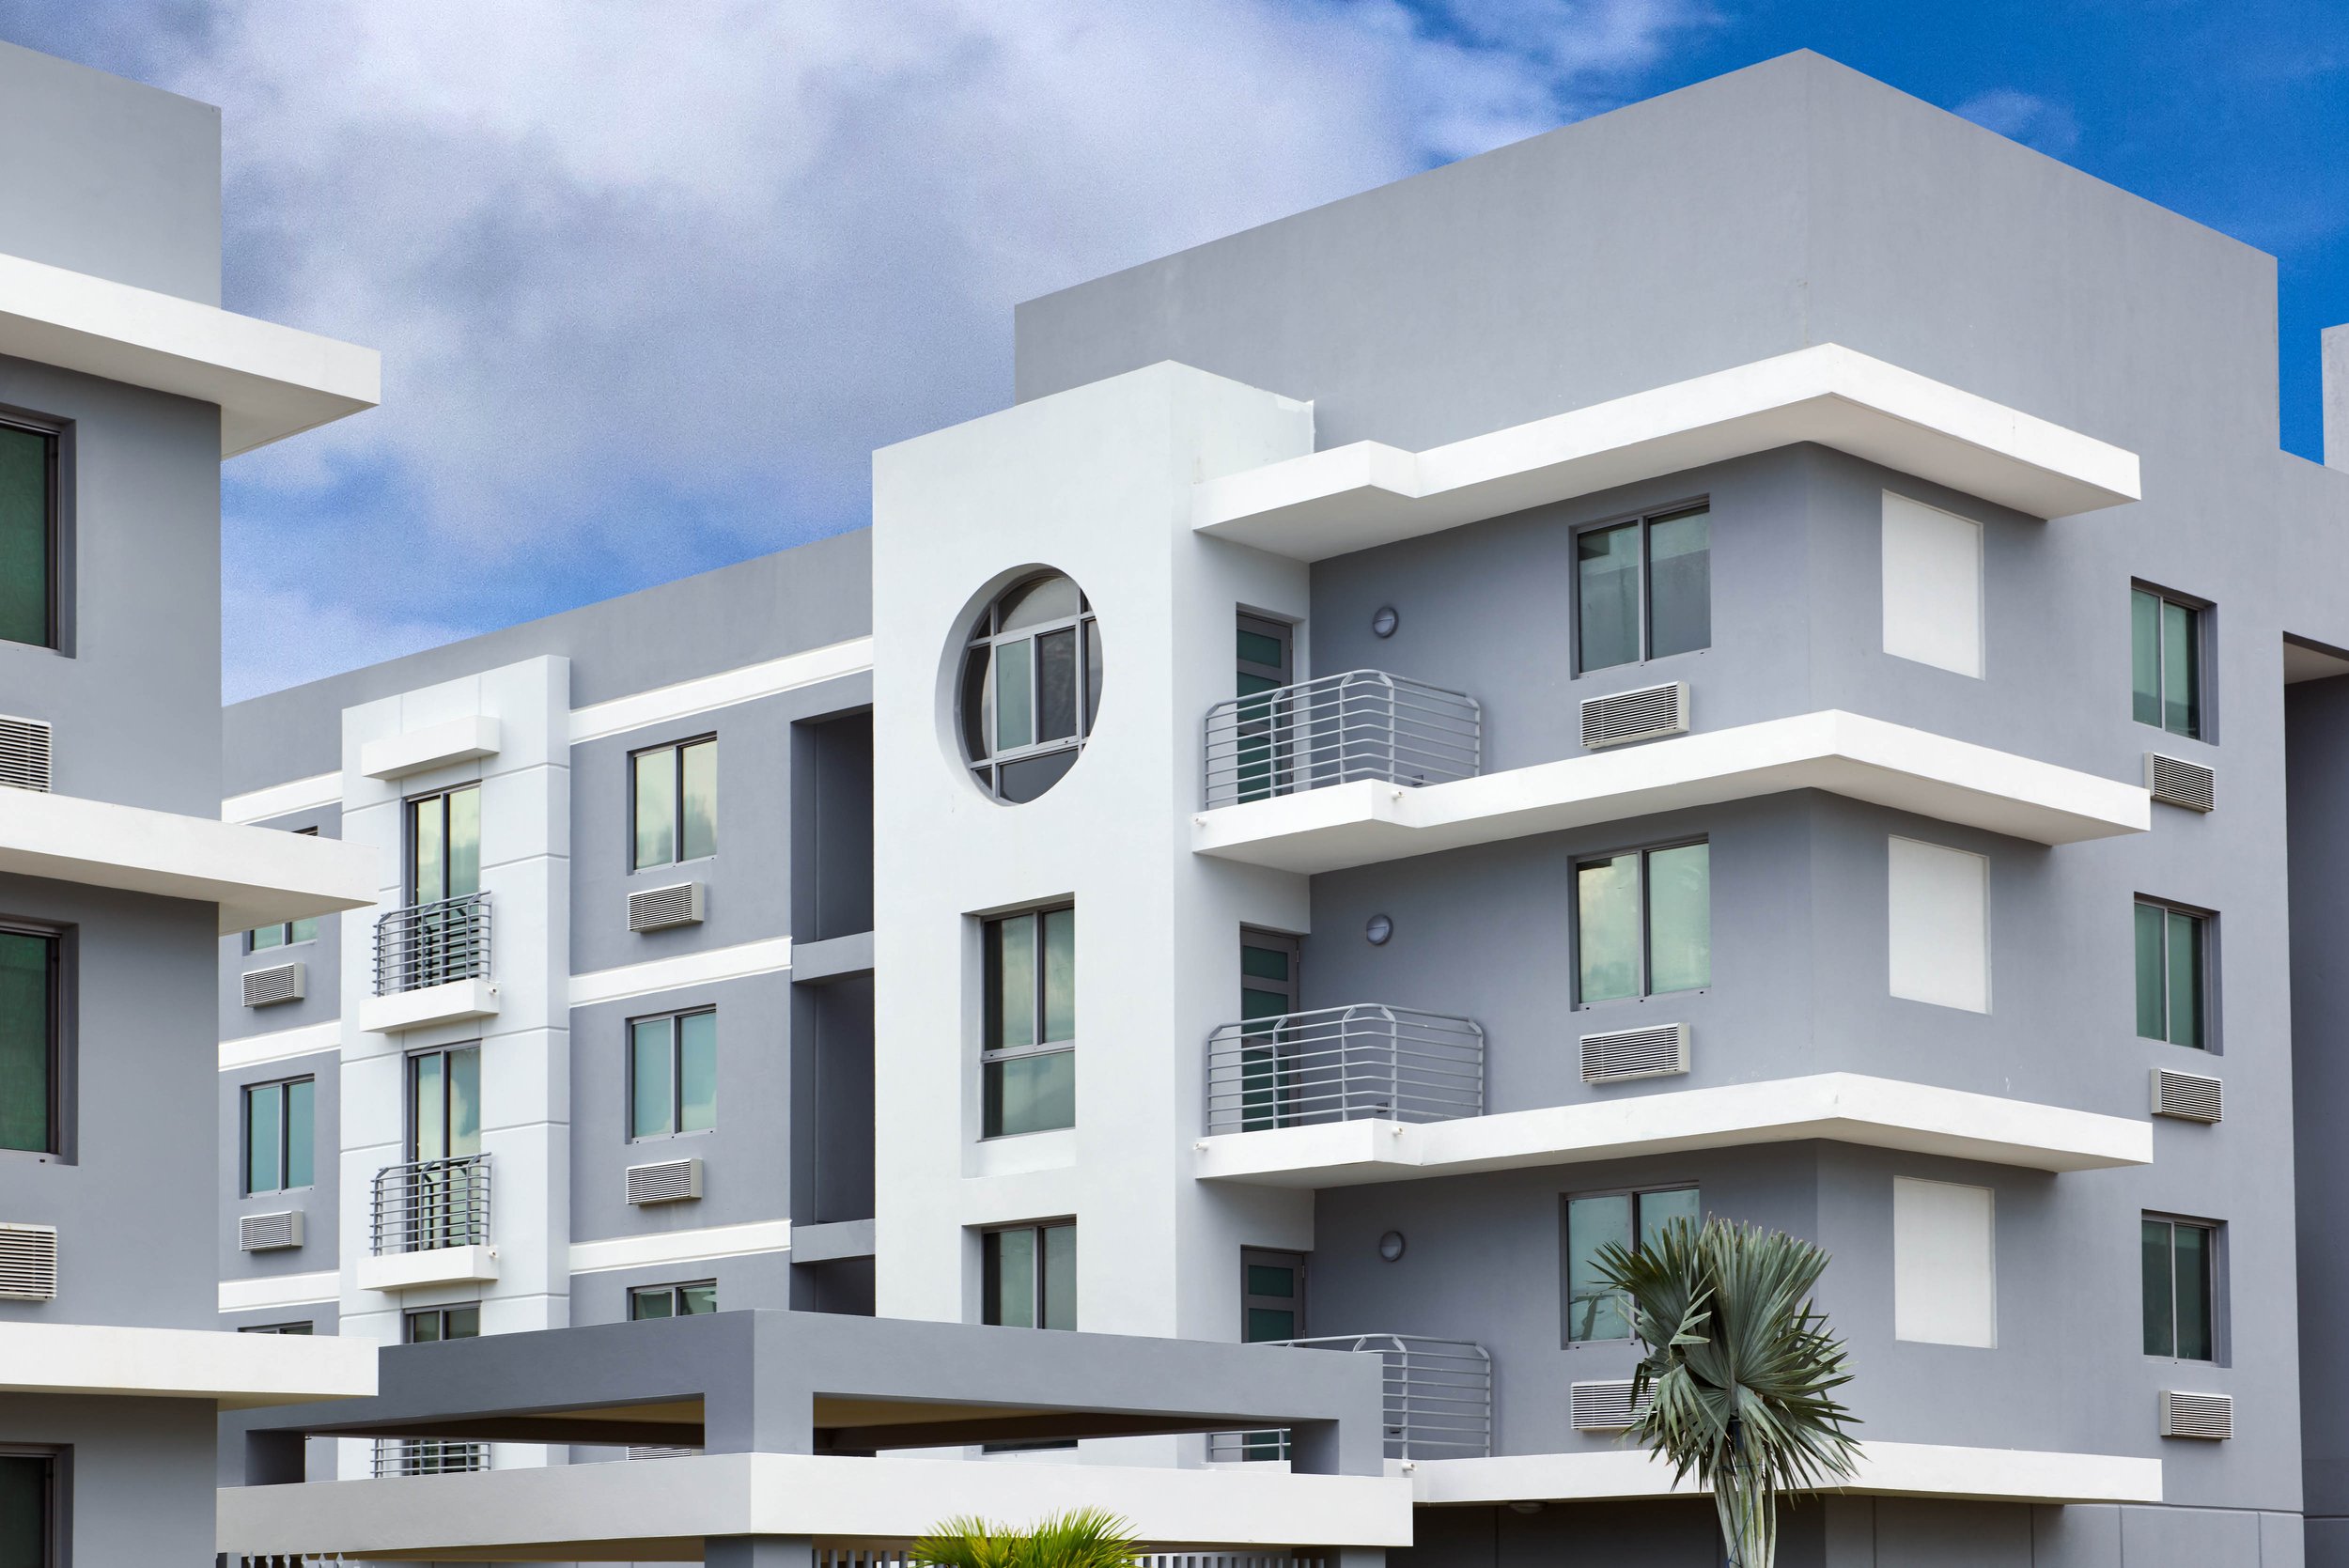  Exterior view of Bayshore Villas affordable housing project. 